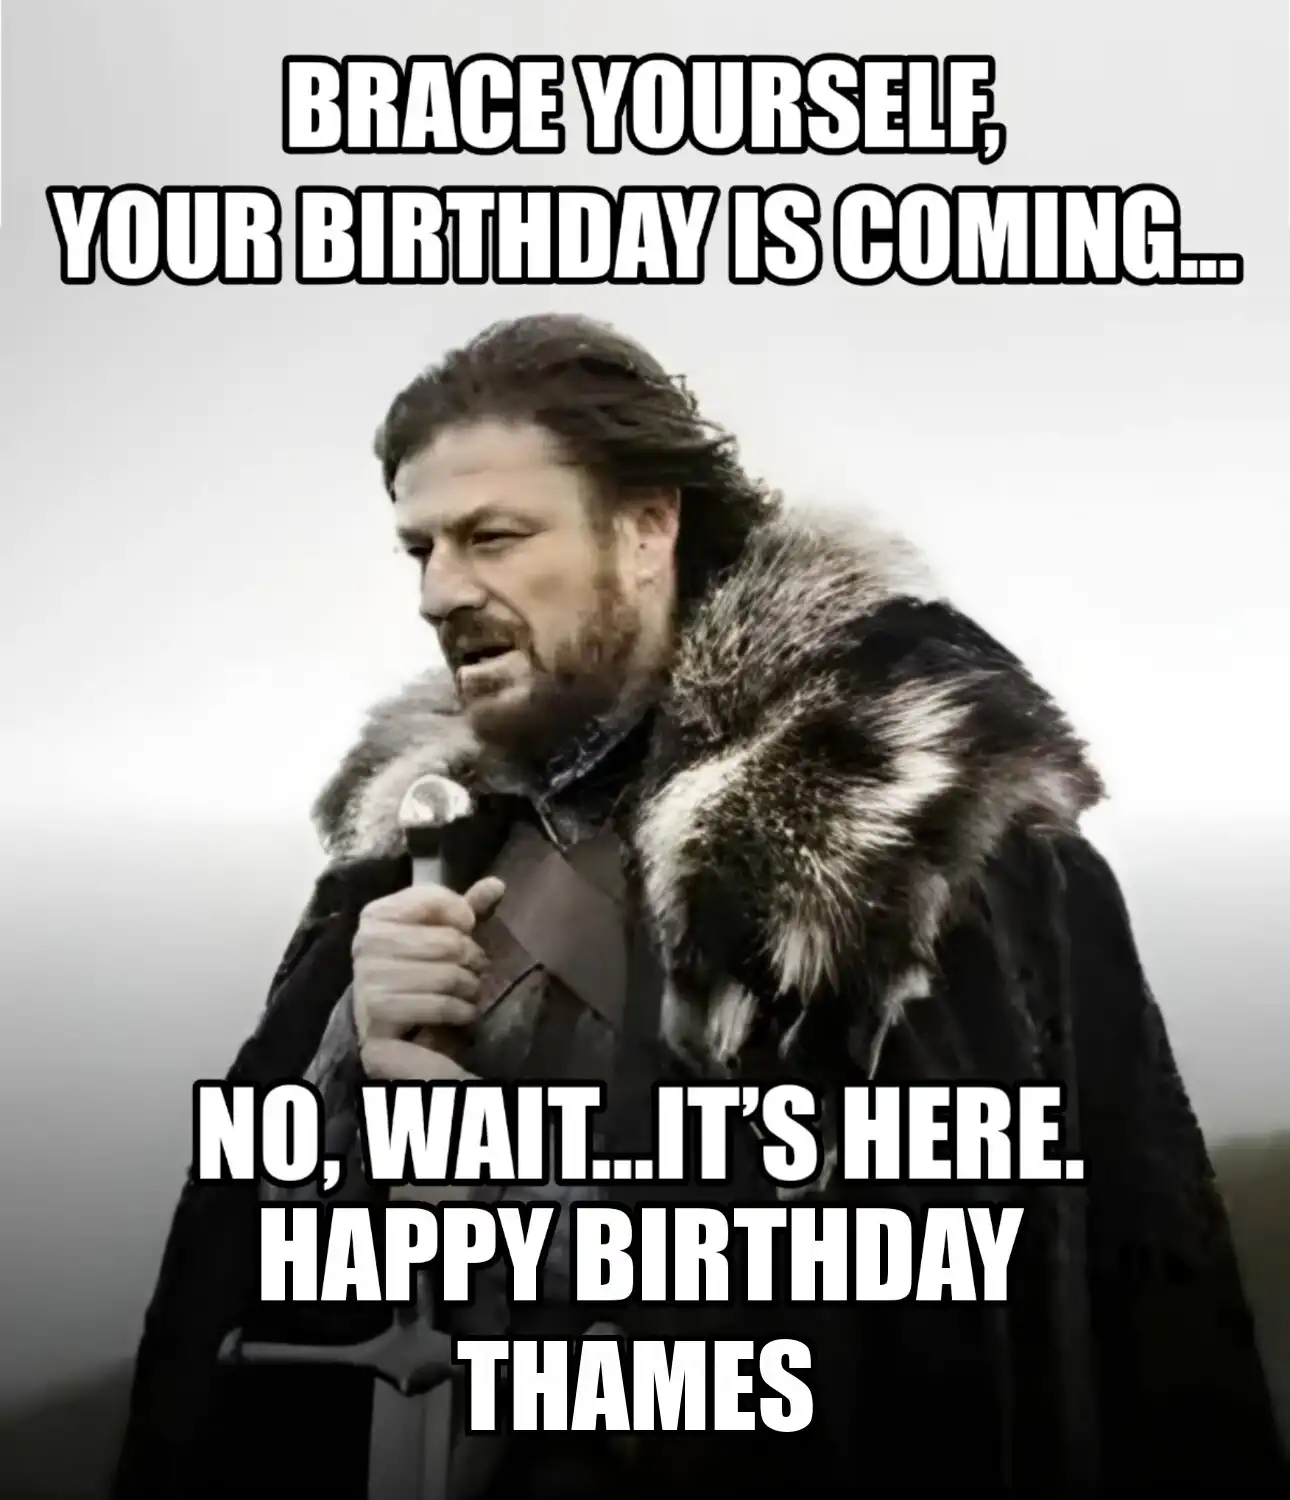 Happy Birthday Thames Brace Yourself Your Birthday Is Coming Meme